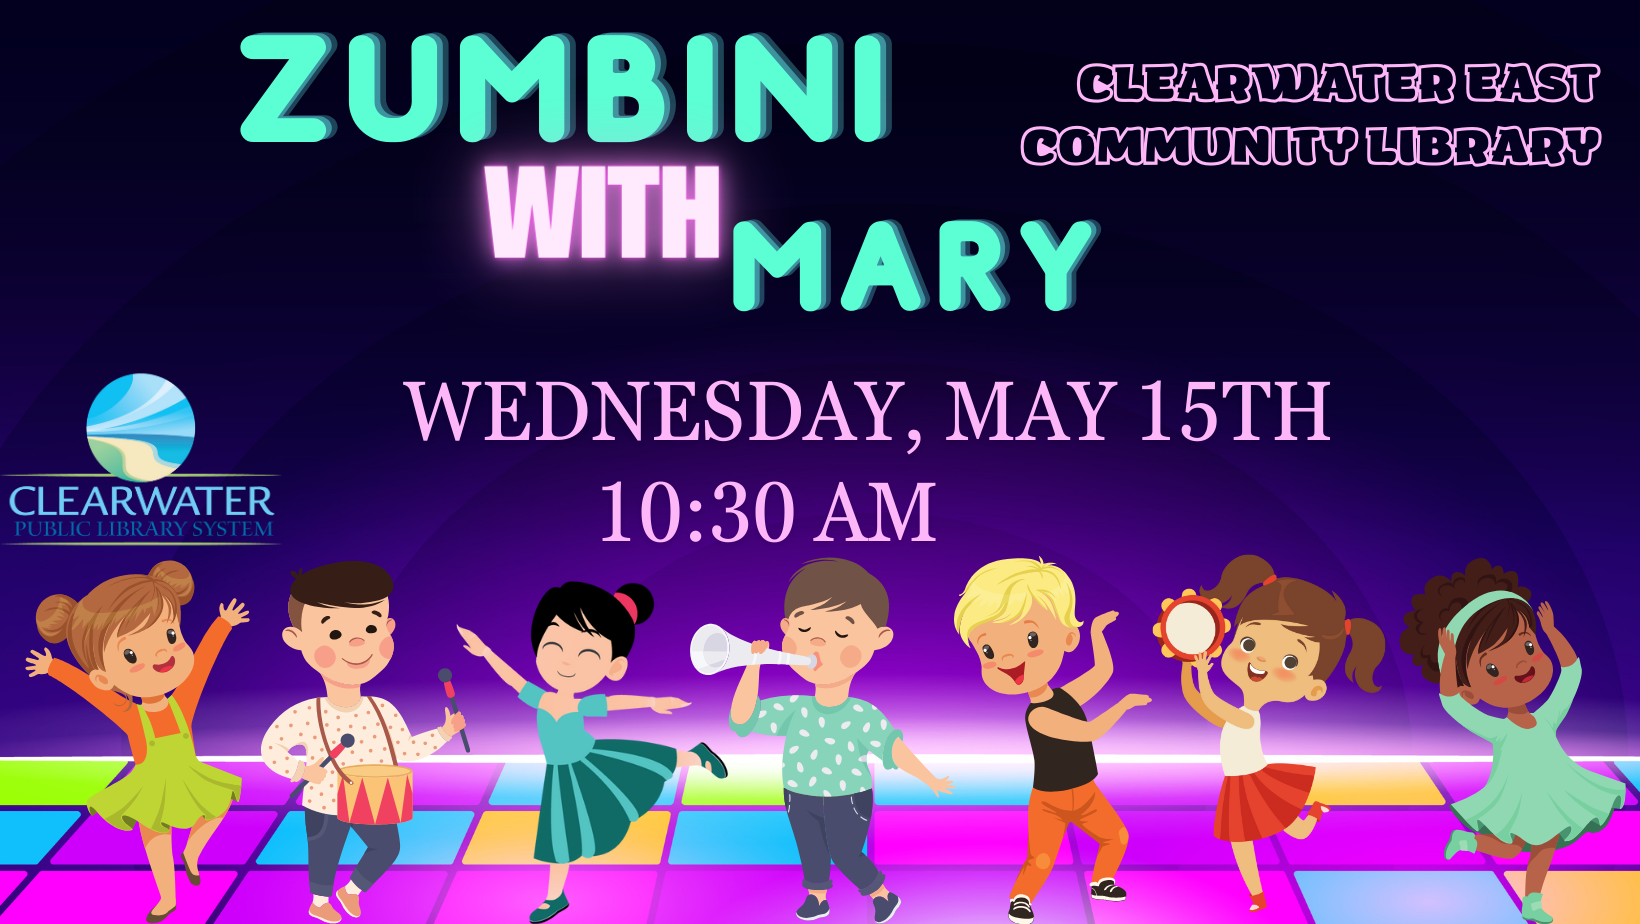 Zumbini with Mary, Wednesday May 15th, Children on dance floor dancing different styles of dance